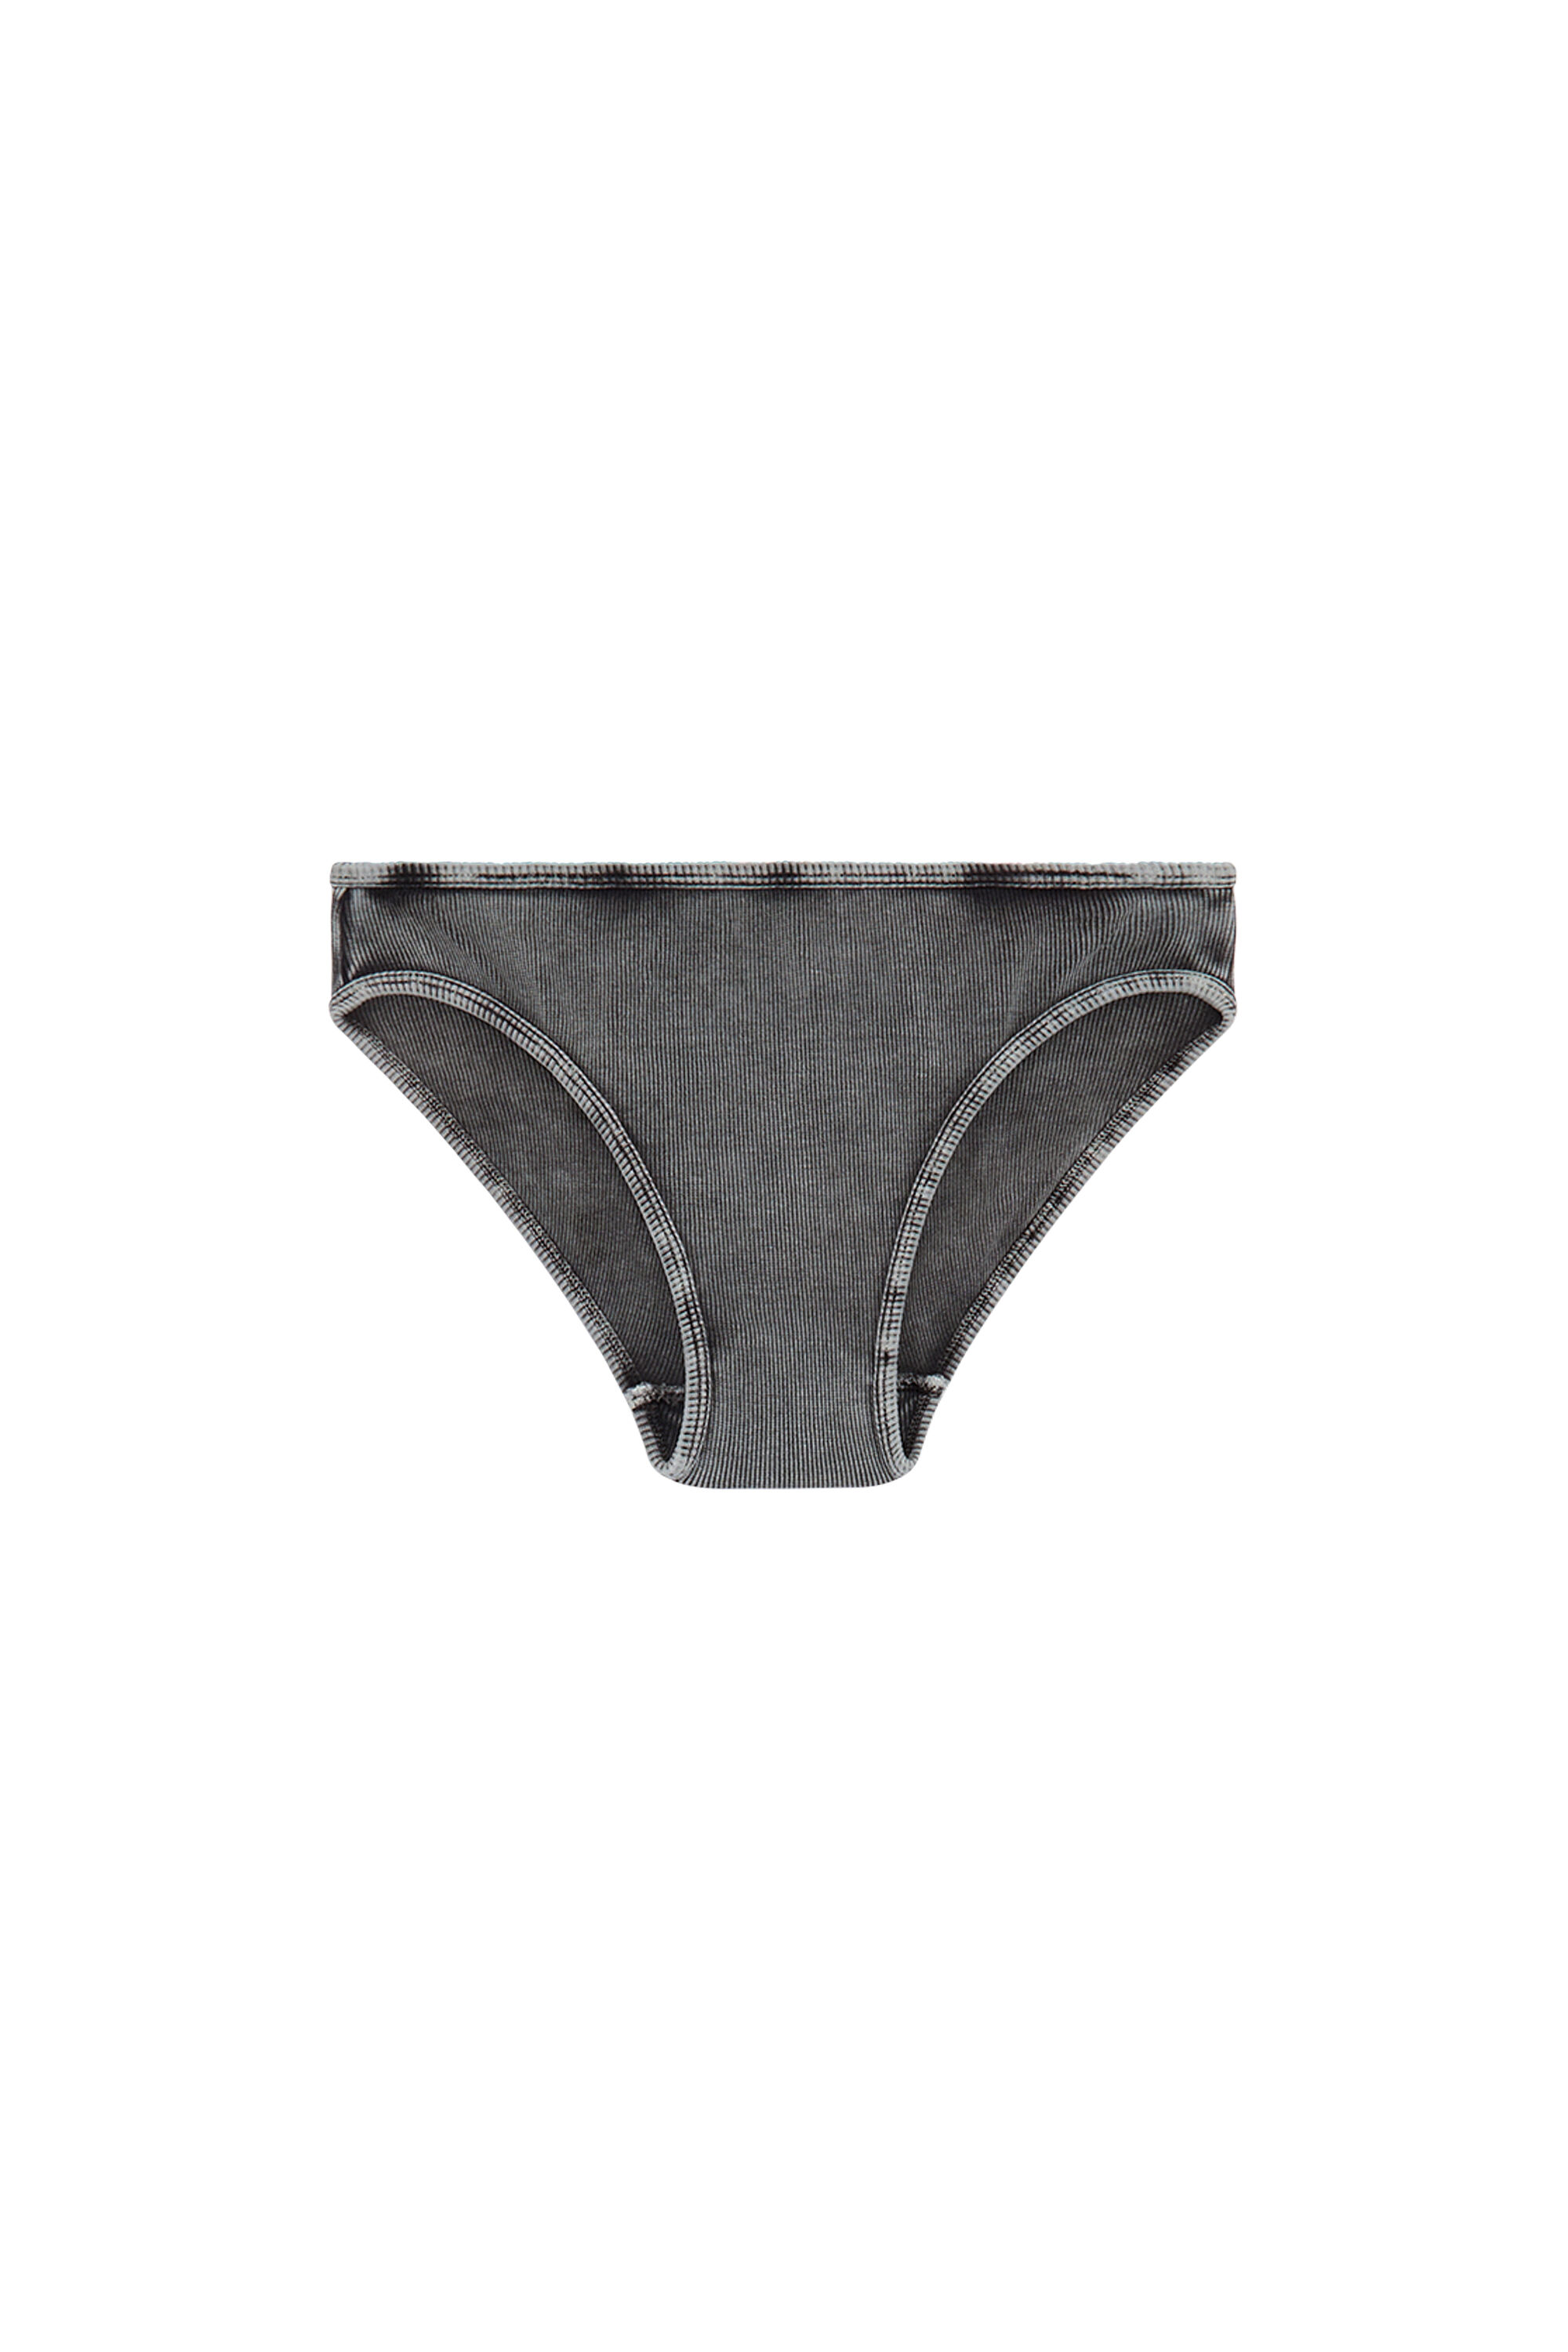 Diesel - UFPN-D-OVAL-HIGH-WAISTED-BRIEF, Mujer Braguitas en canalé con placa Oval D in Negro - Image 2